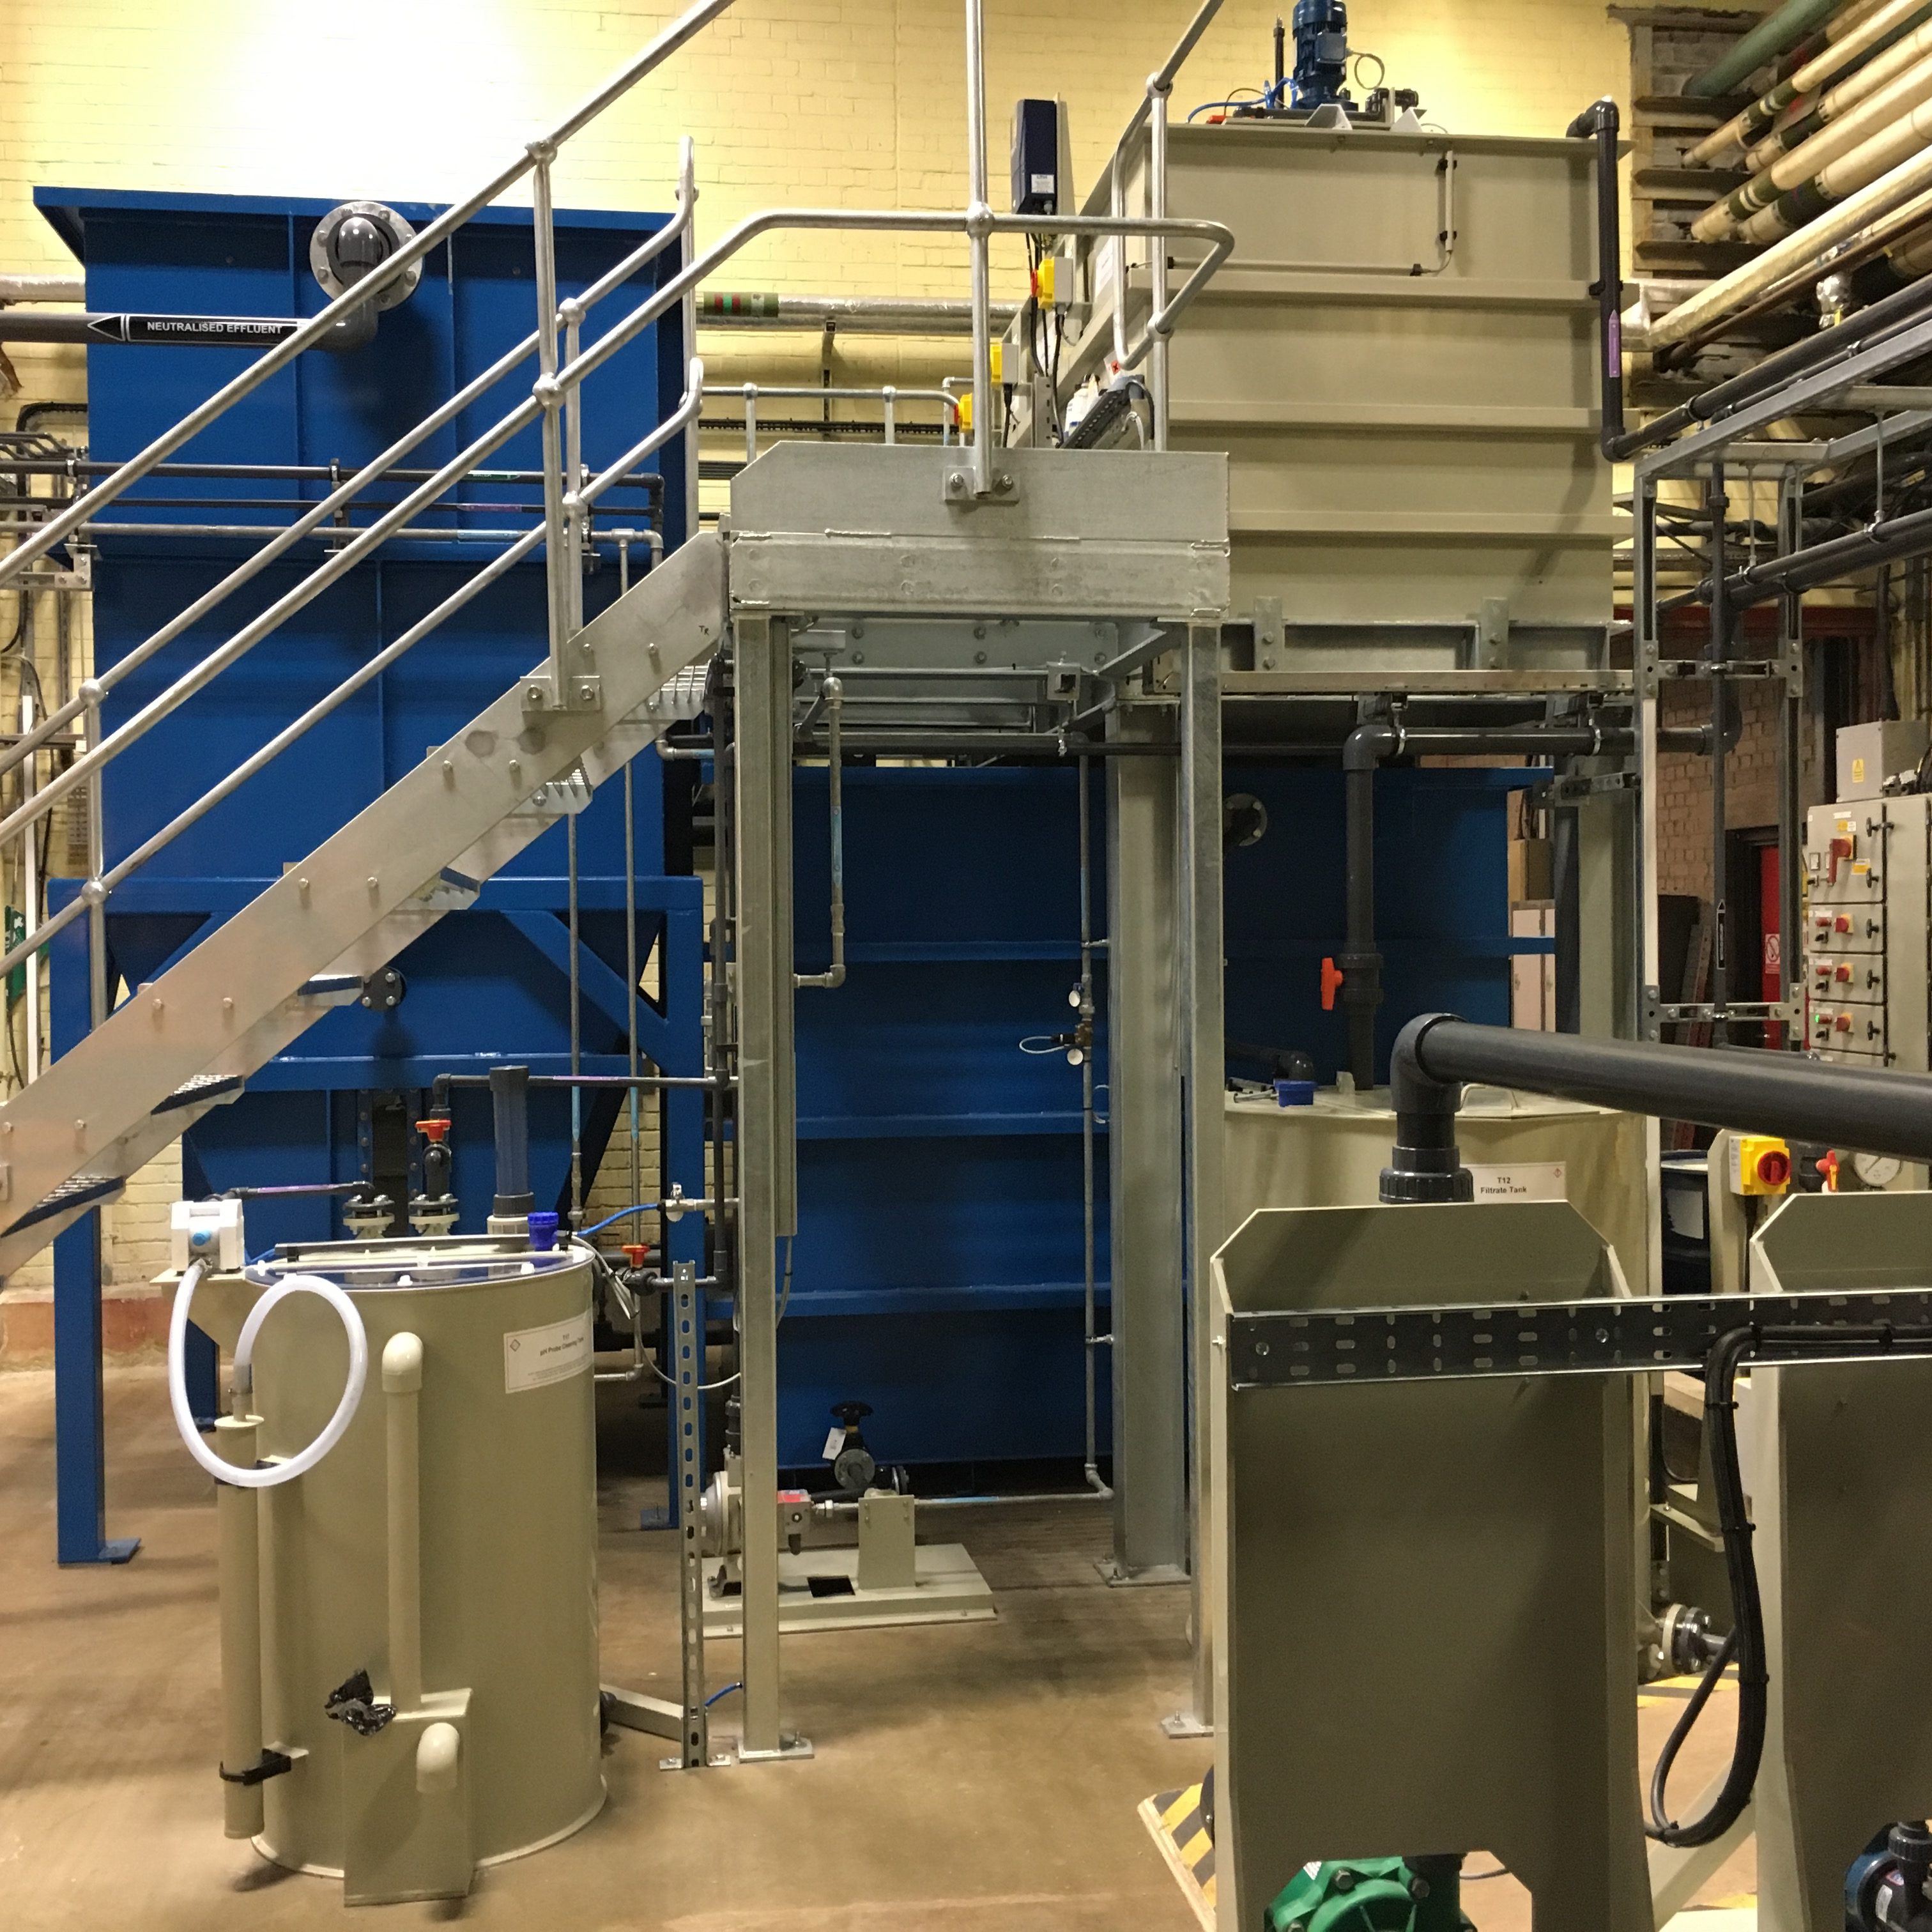 Aerospace sector demands high quality Wastewater Treatmant plants